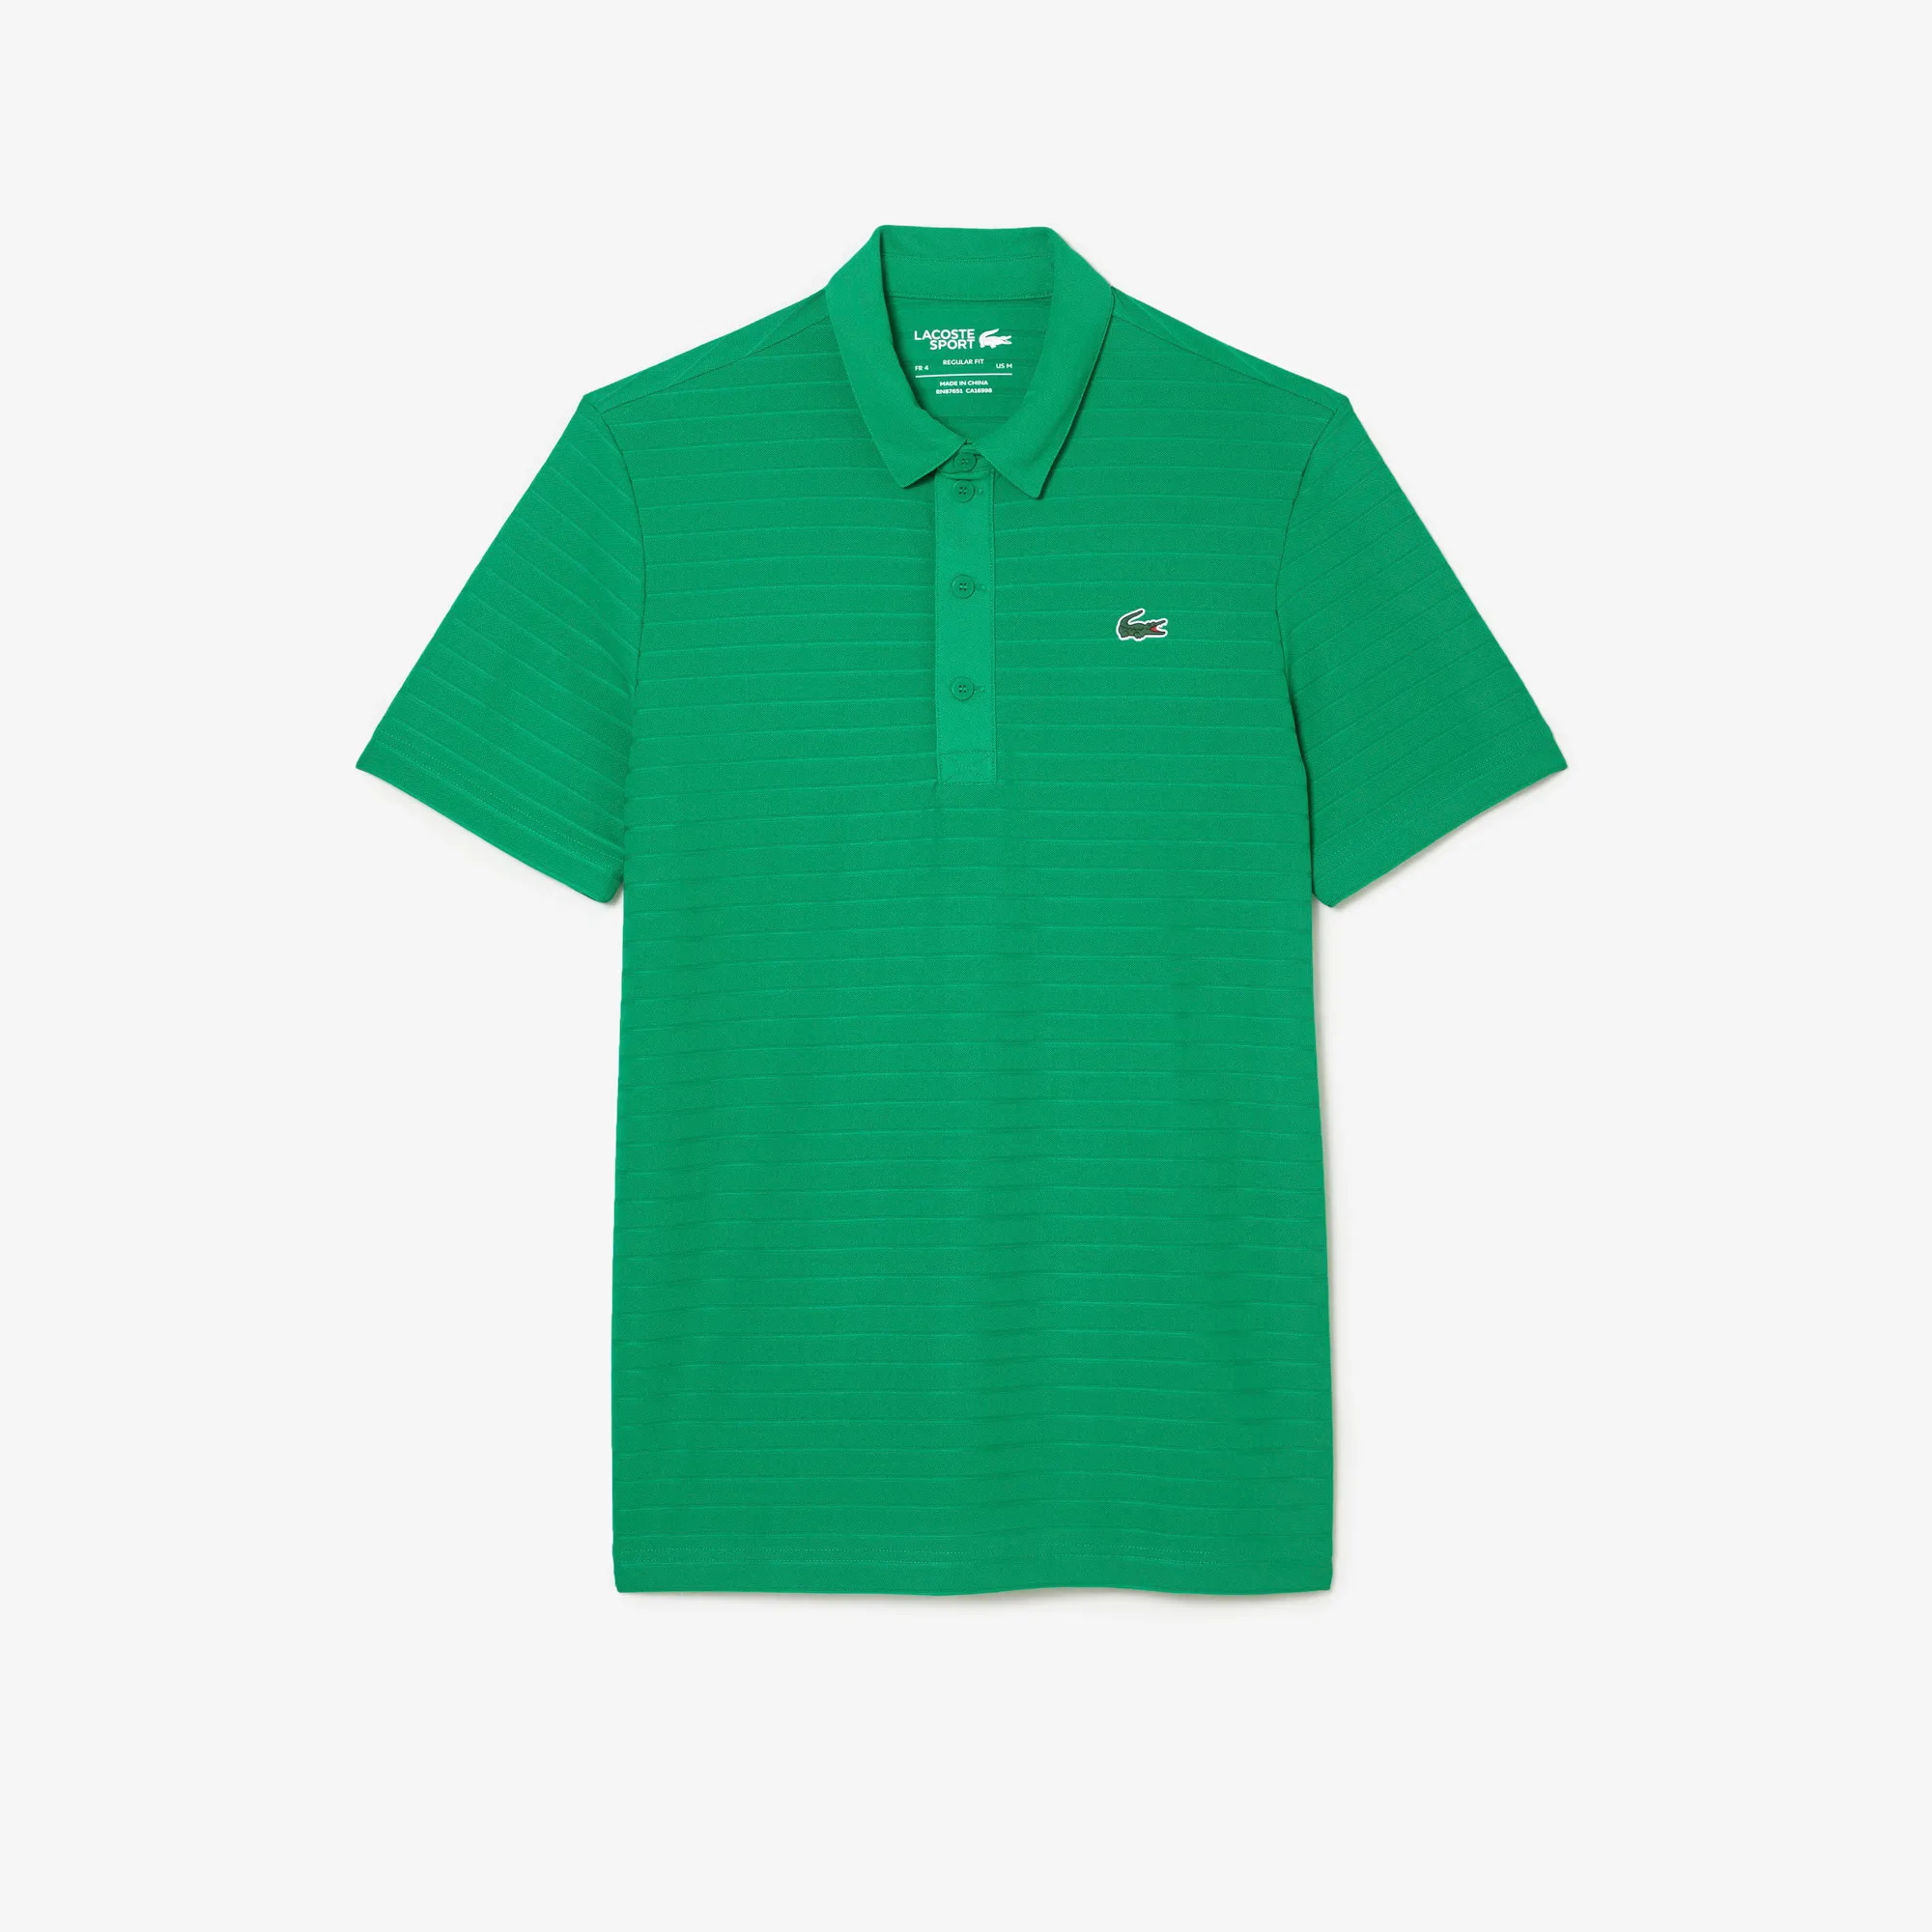 Men’s Lacoste SPORT Textured Breathable Golf Polo Shirt